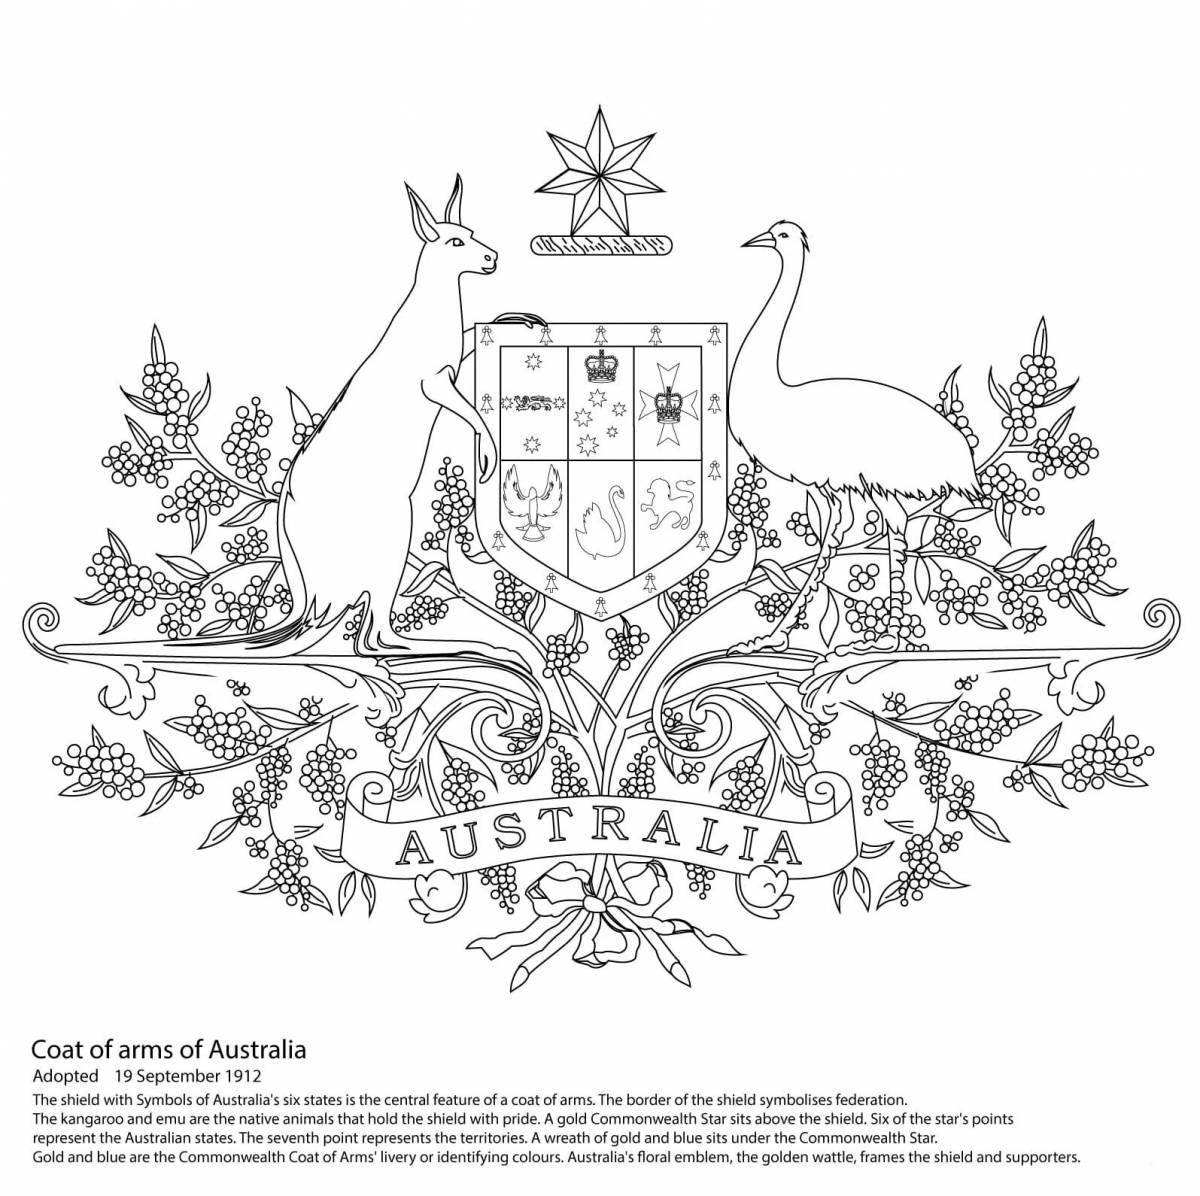 Australian coat of arms coloring page in bright colors